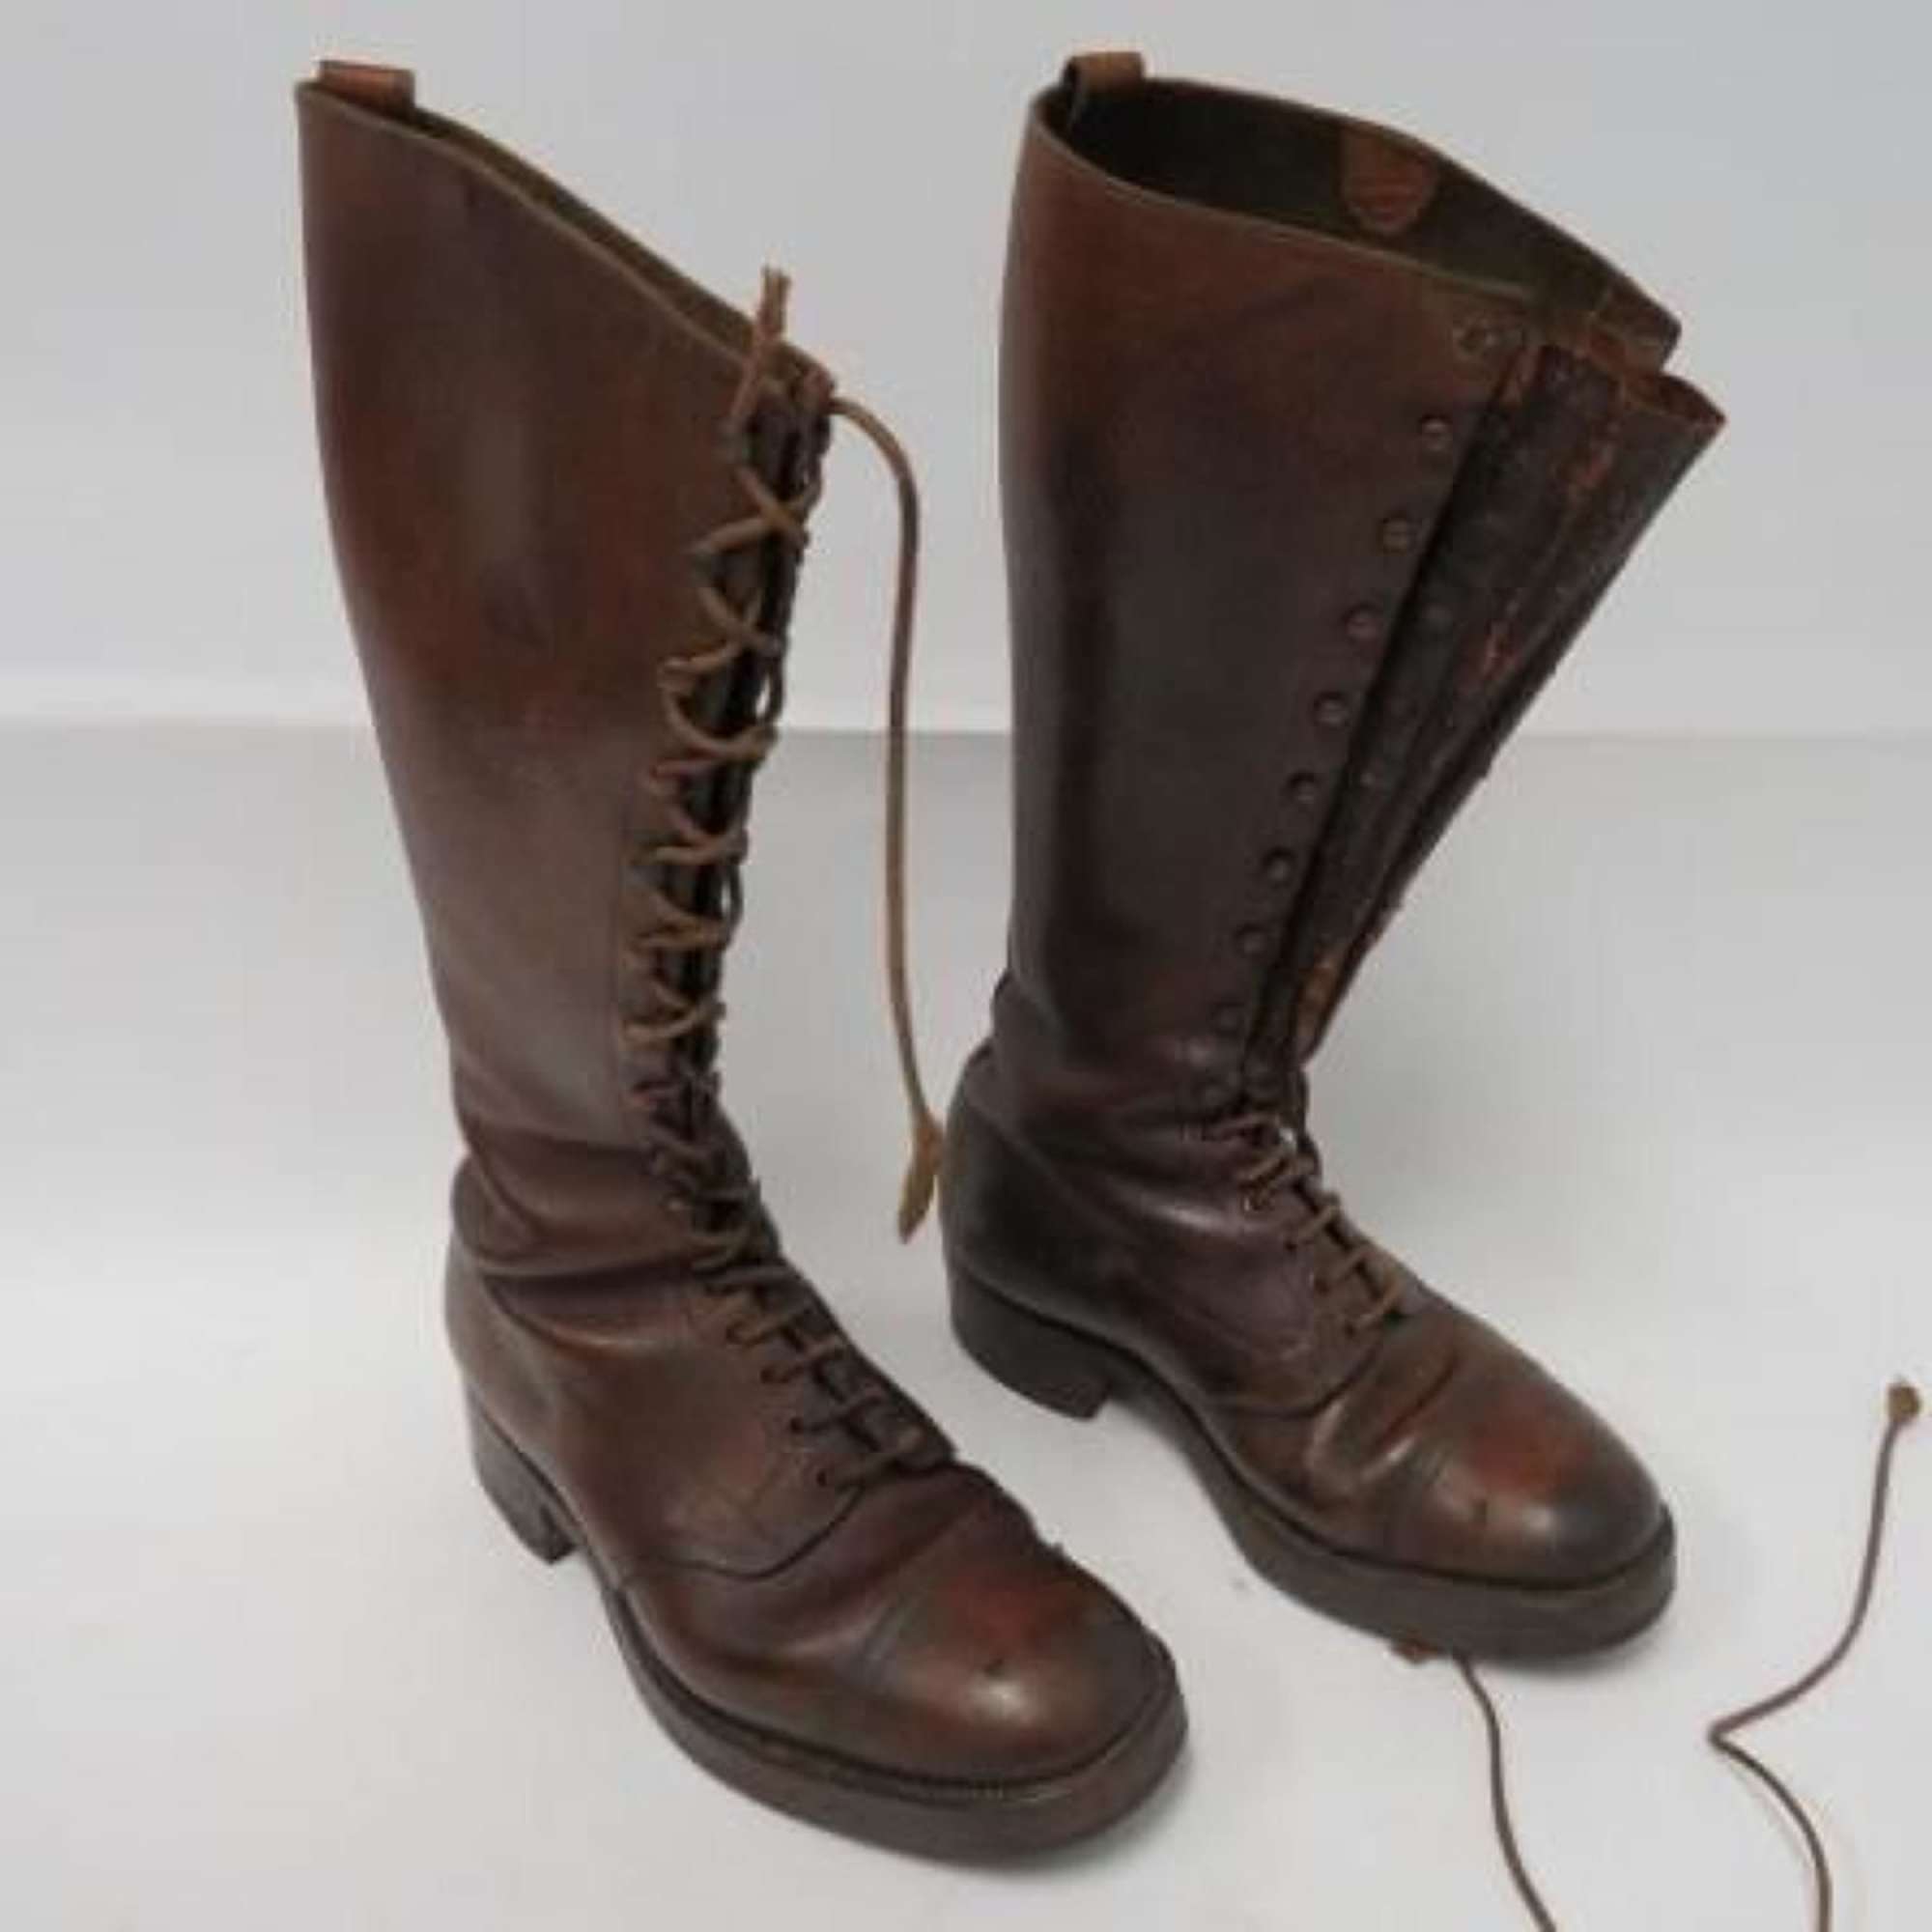 Scarce pair of WW1 Officers Trench Boots